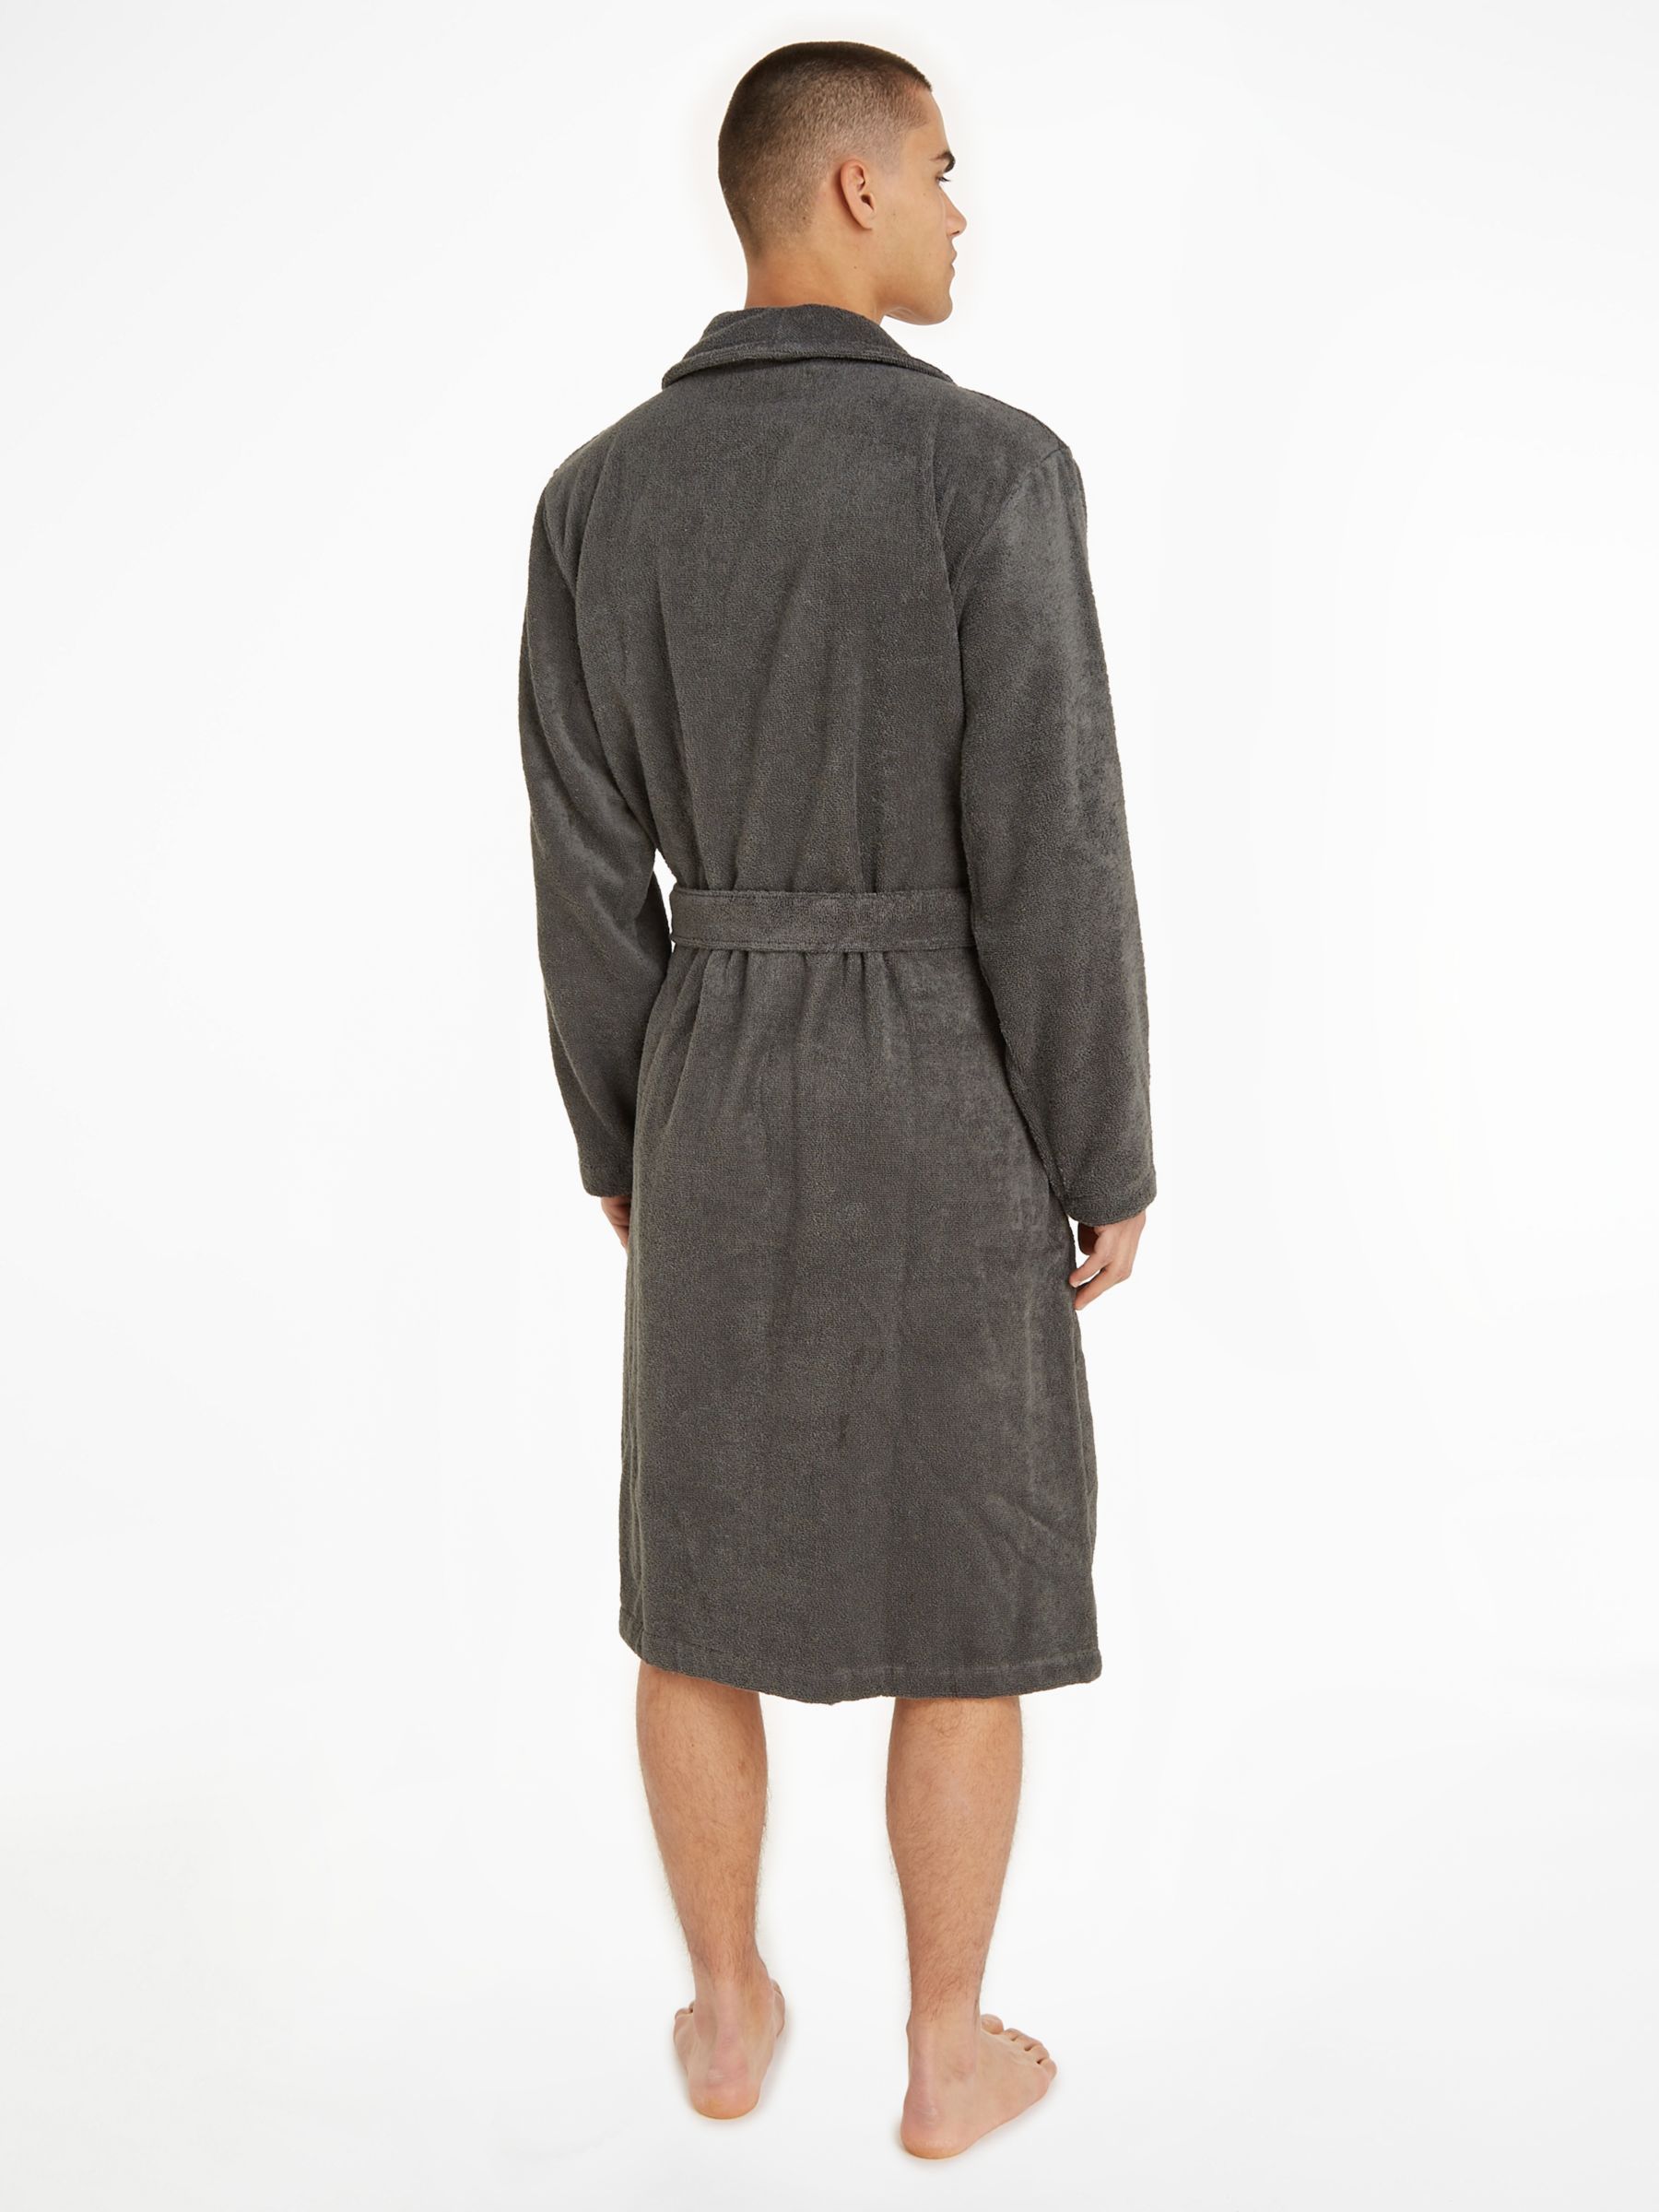 Buy Tommy Hilfiger Pure Cotton Towelling Robe Online at johnlewis.com